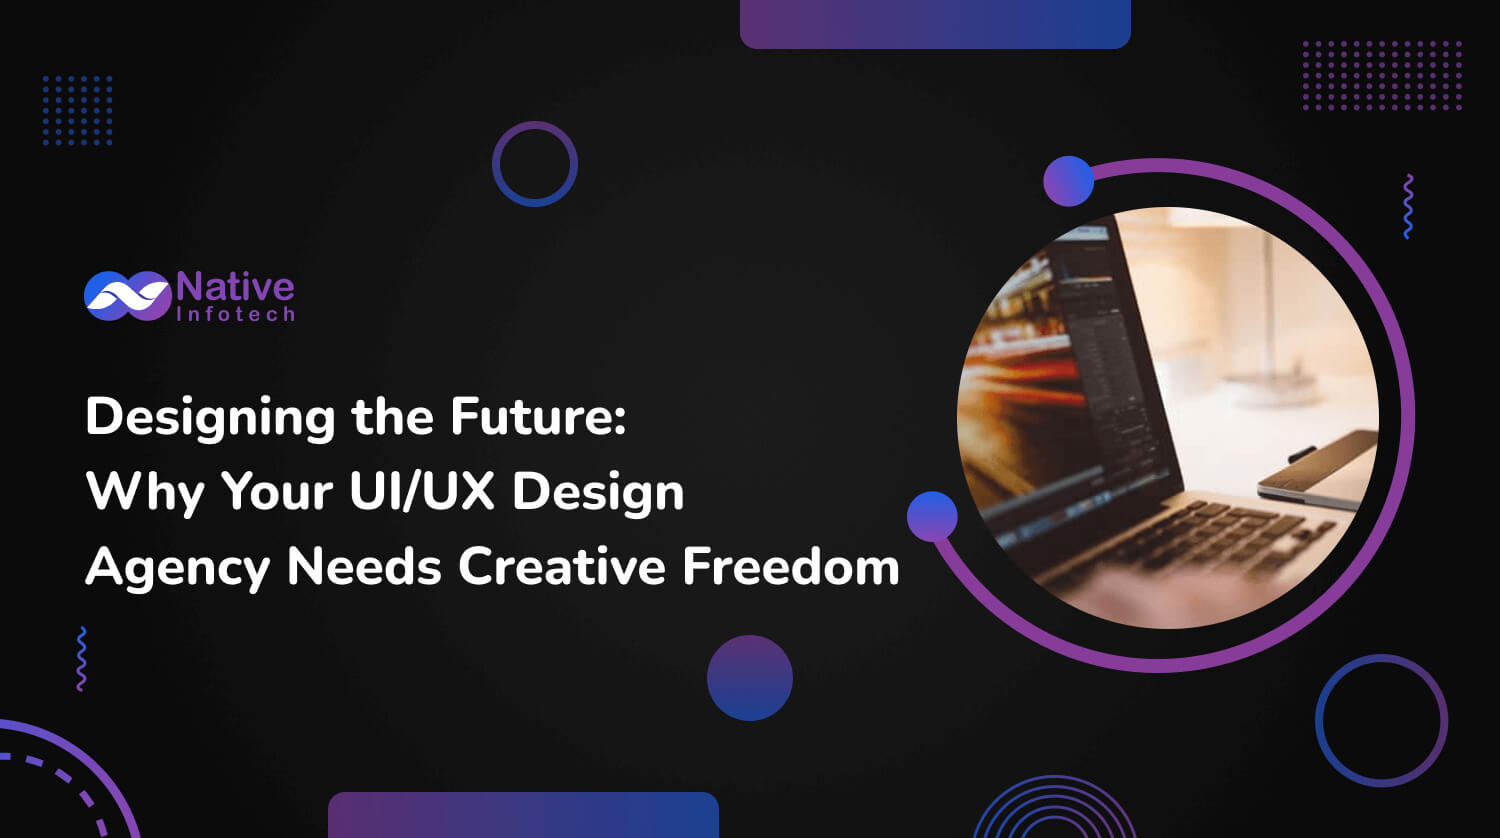 Designing the Future: Why Your UI/UX Design Agency Needs Creative Freedom | Native Infotech